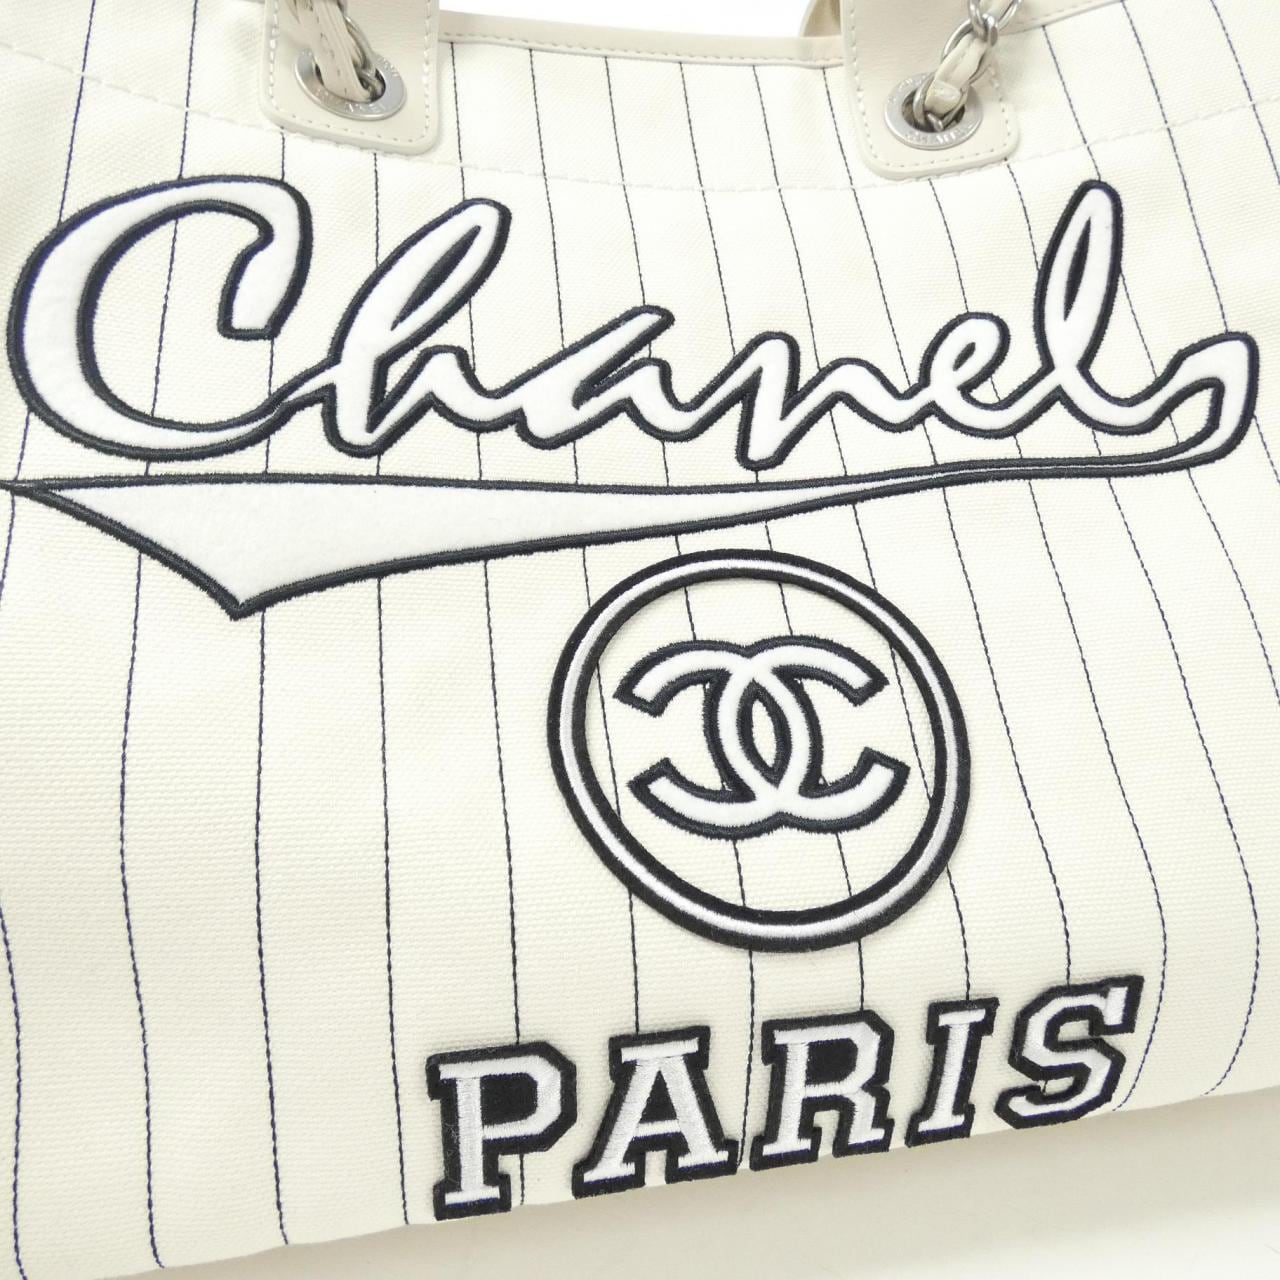 CHANEL deauville 系列 66941 包